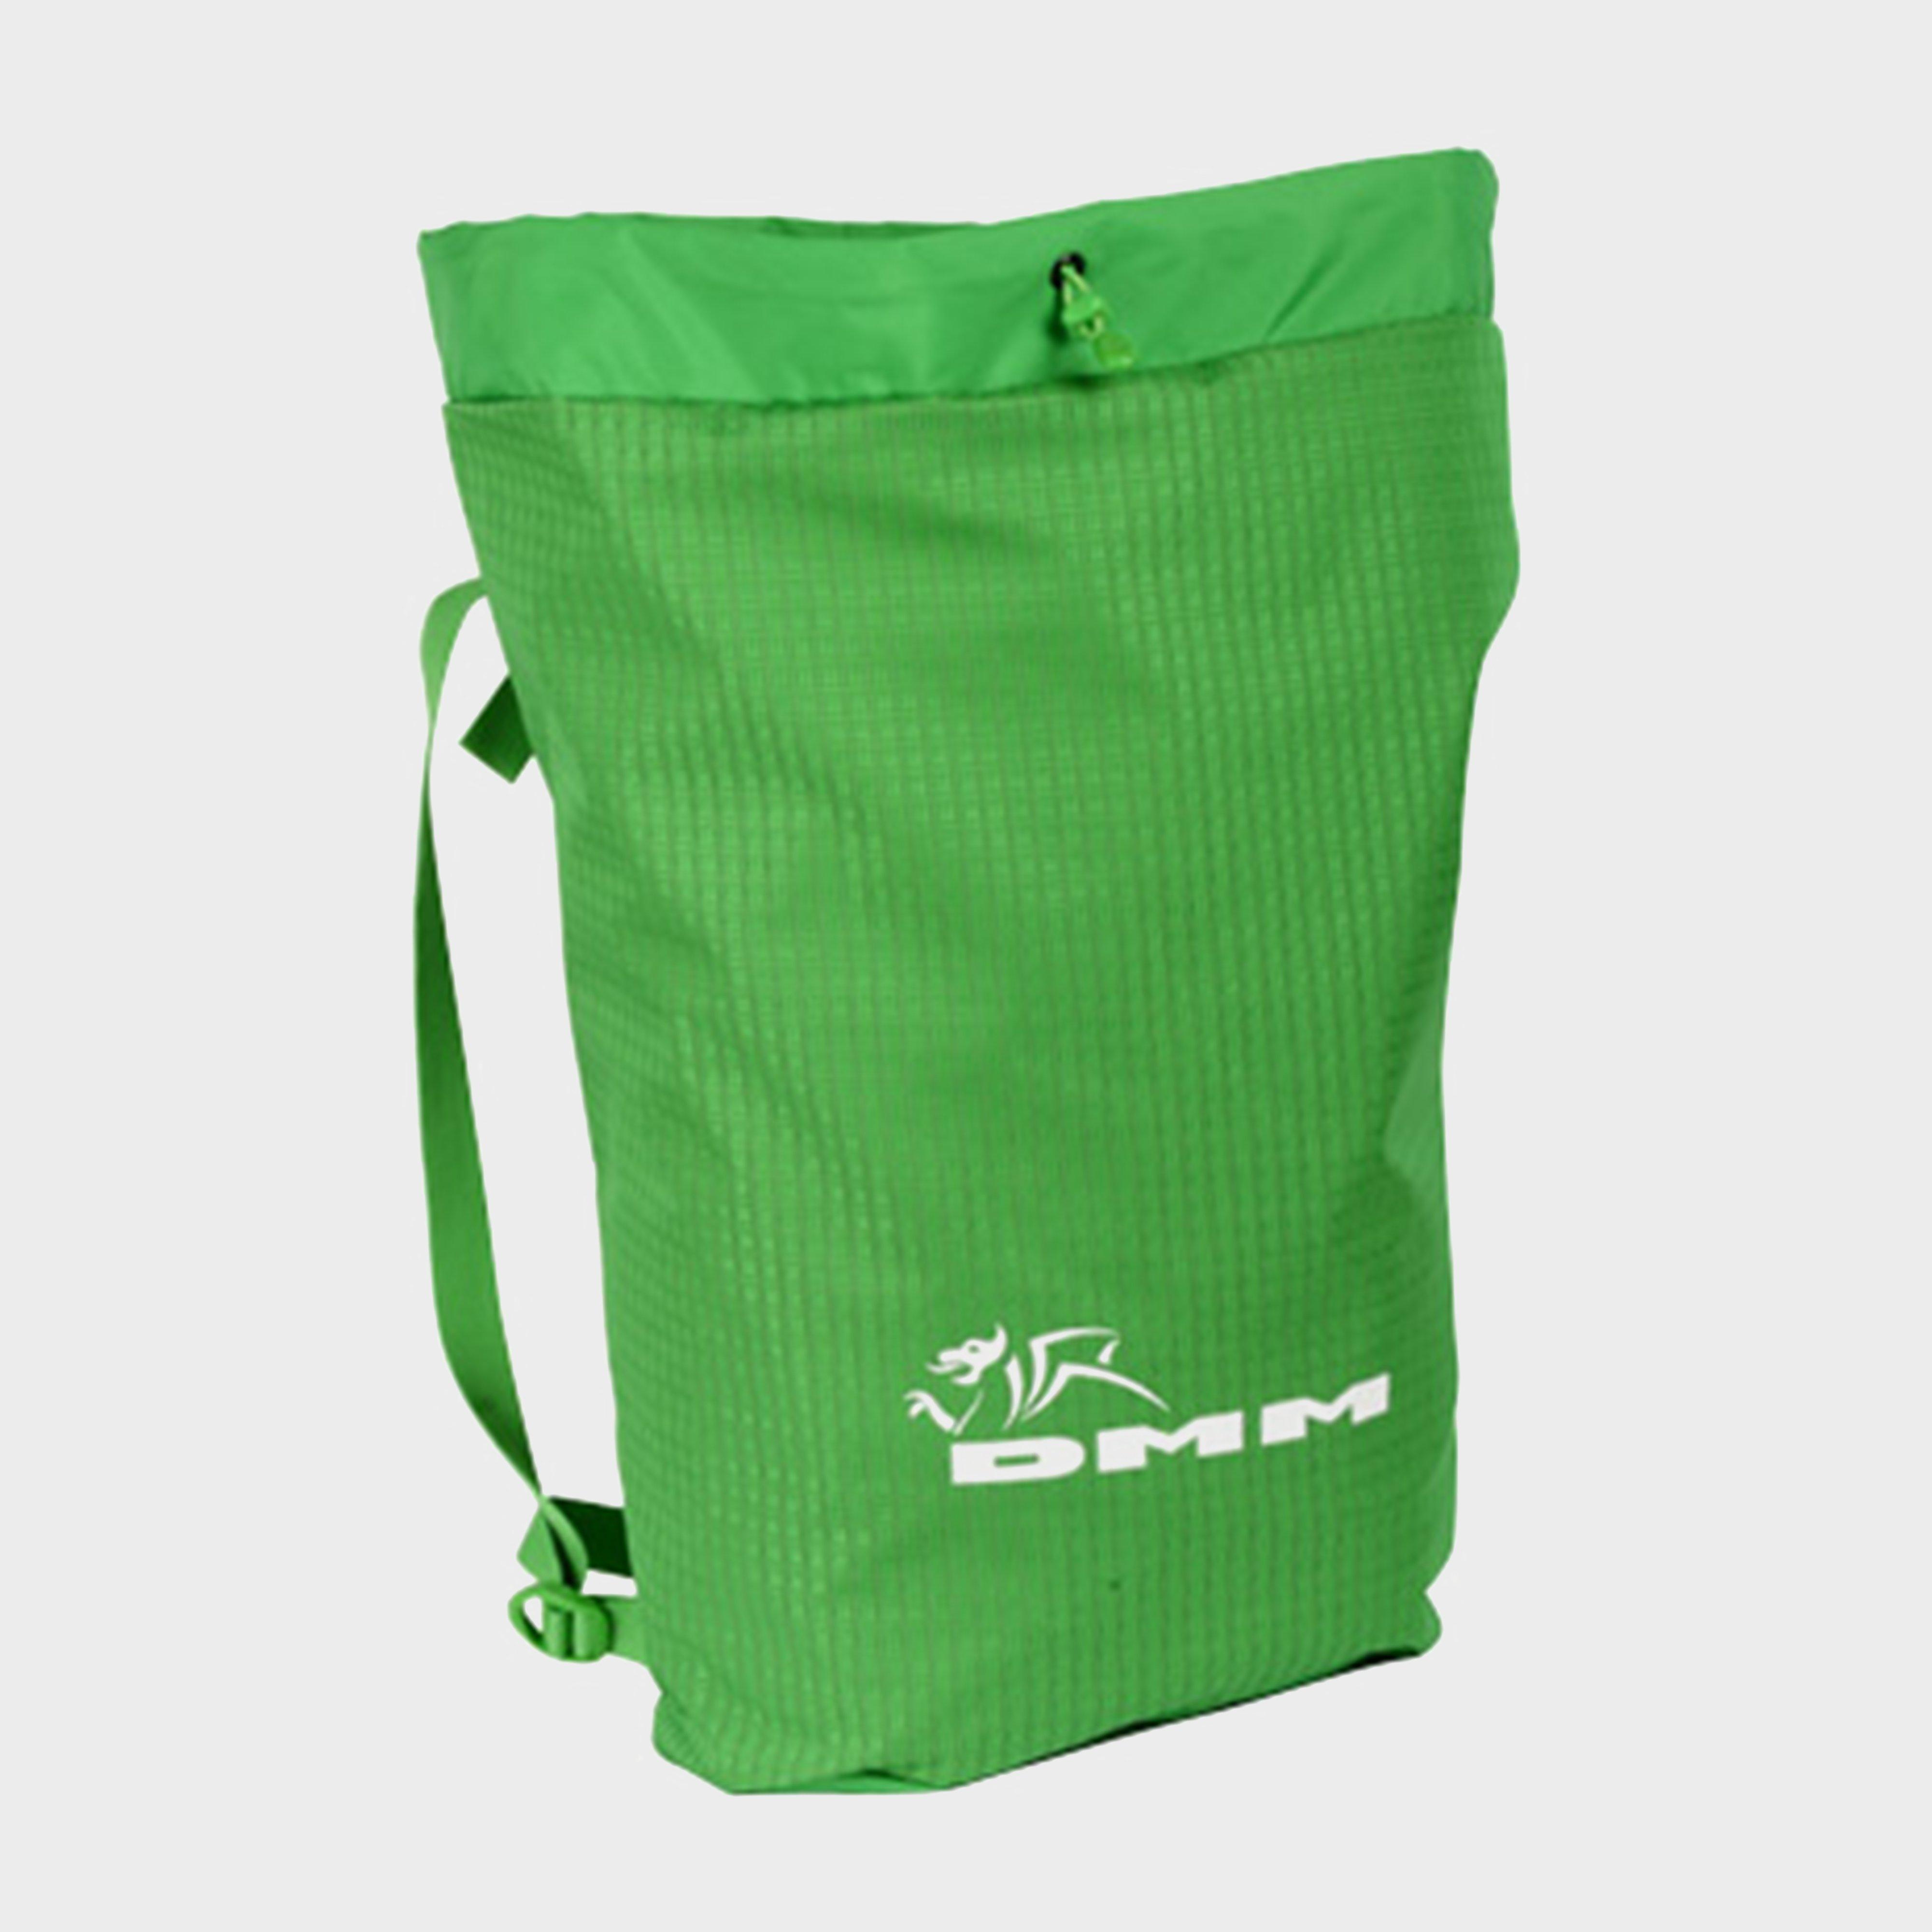 DMM Pitcher Rope Bag Review